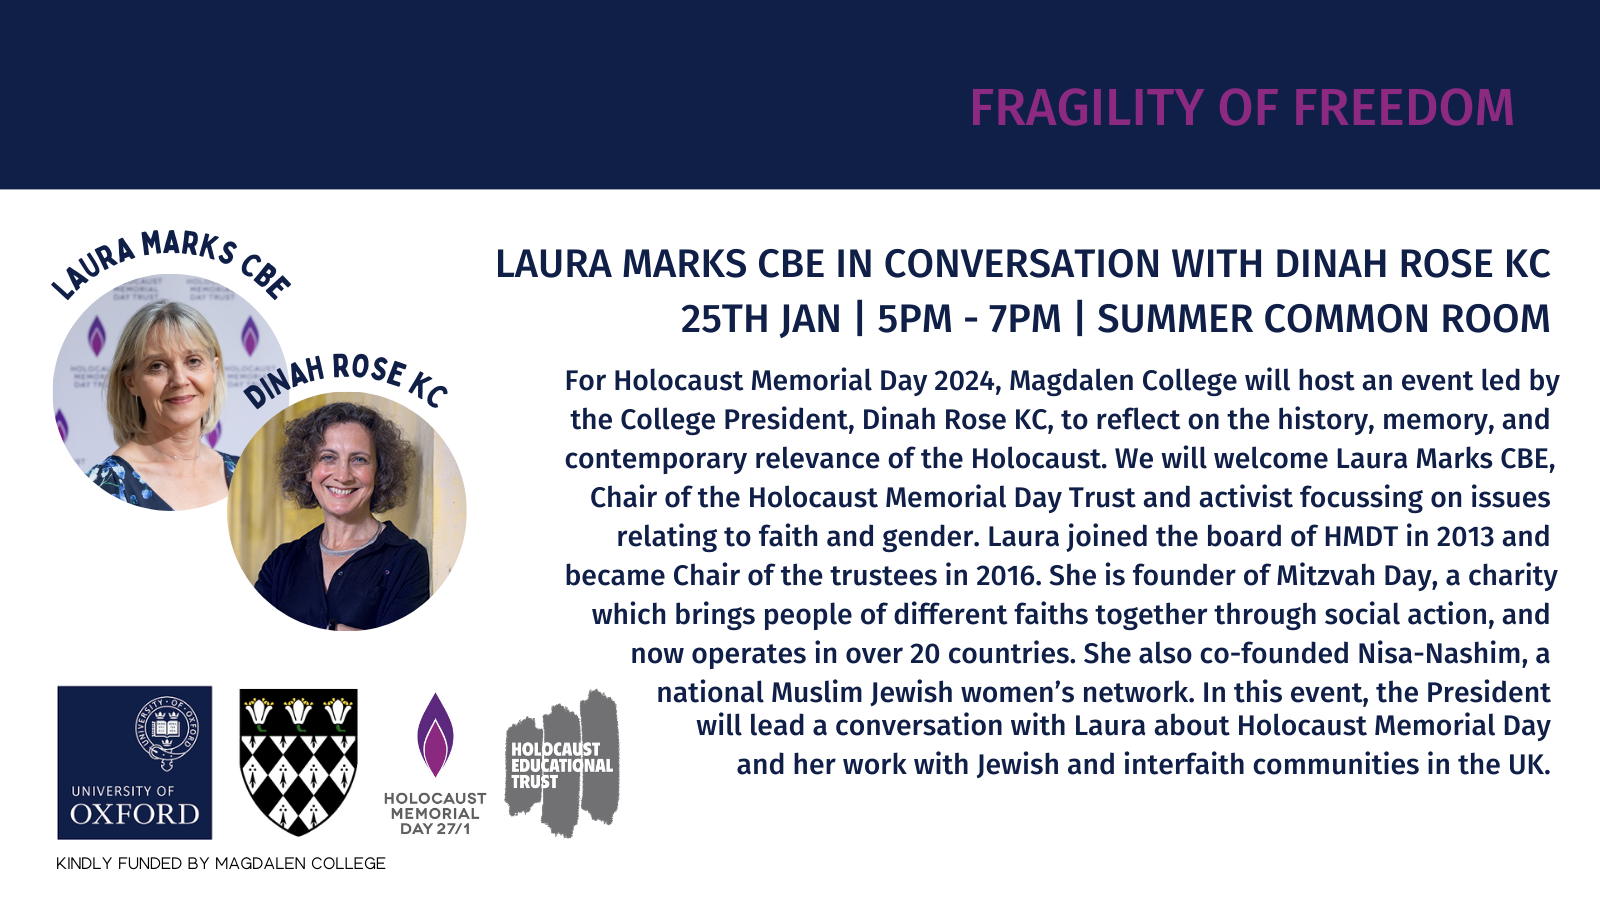 Magdalen College - Laura Marks CBE in conversation with Dinah Rose KC - HMD 2024